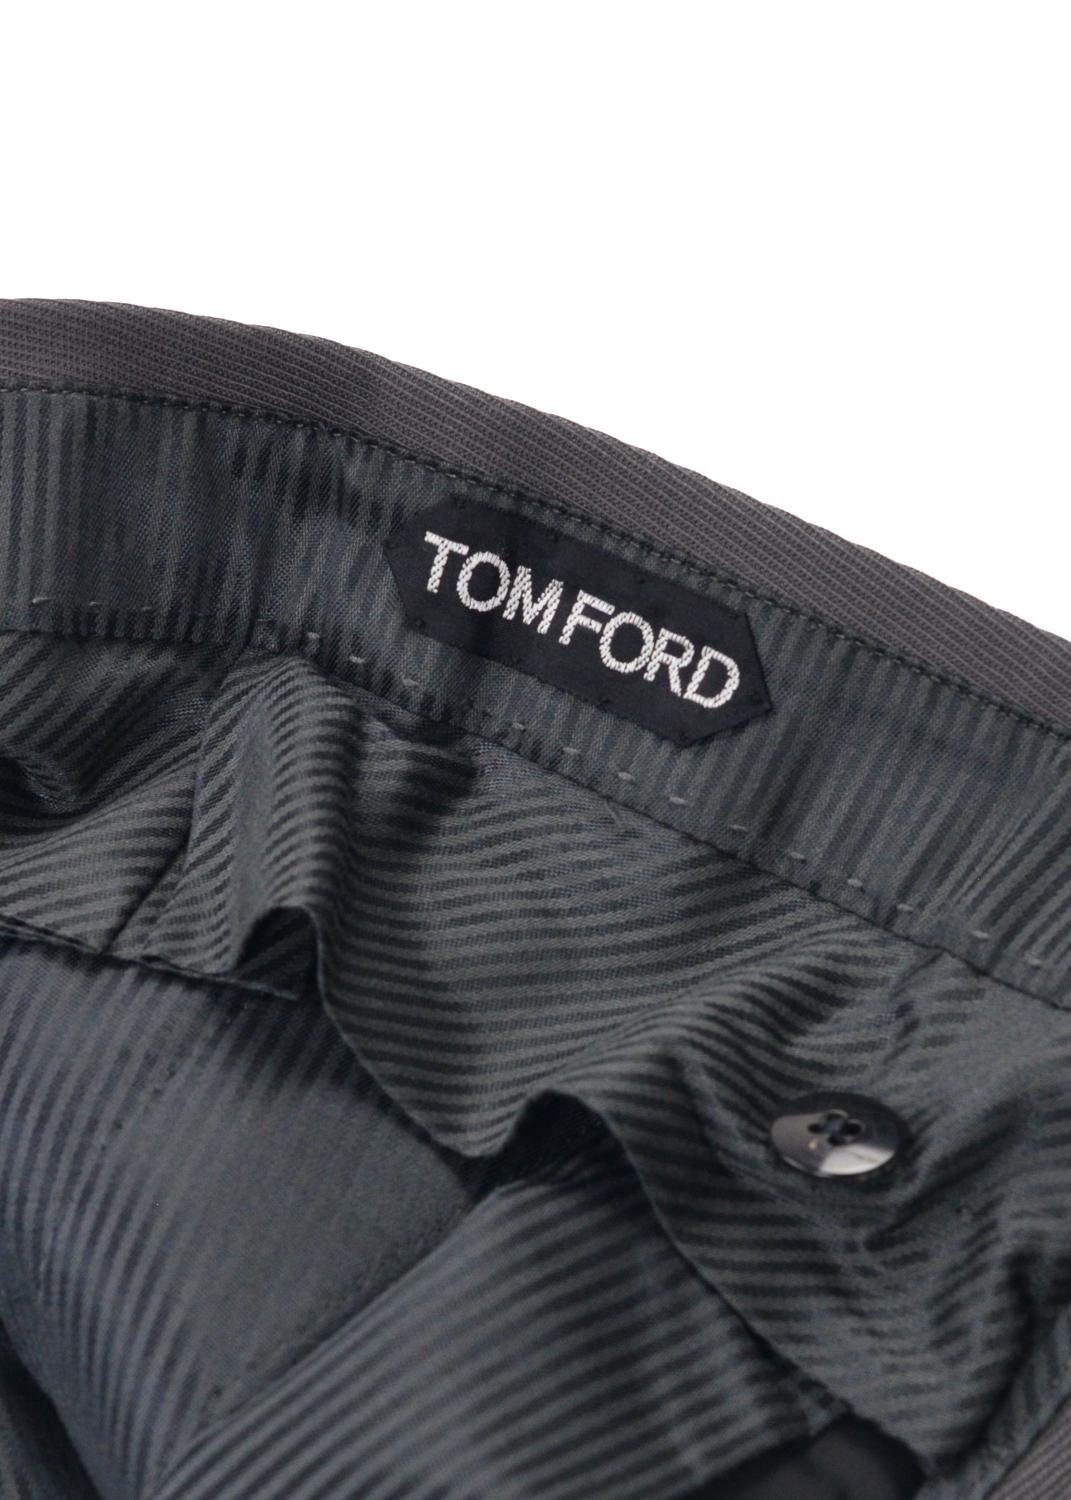 The modern Tom Ford Man possesses the confidence in his pleated trousers. This twill textured pair features a slim leg silhouette, pleated front, and sophisticated concealed pockets. You can pair these pants with a crisp white top for the ultimate